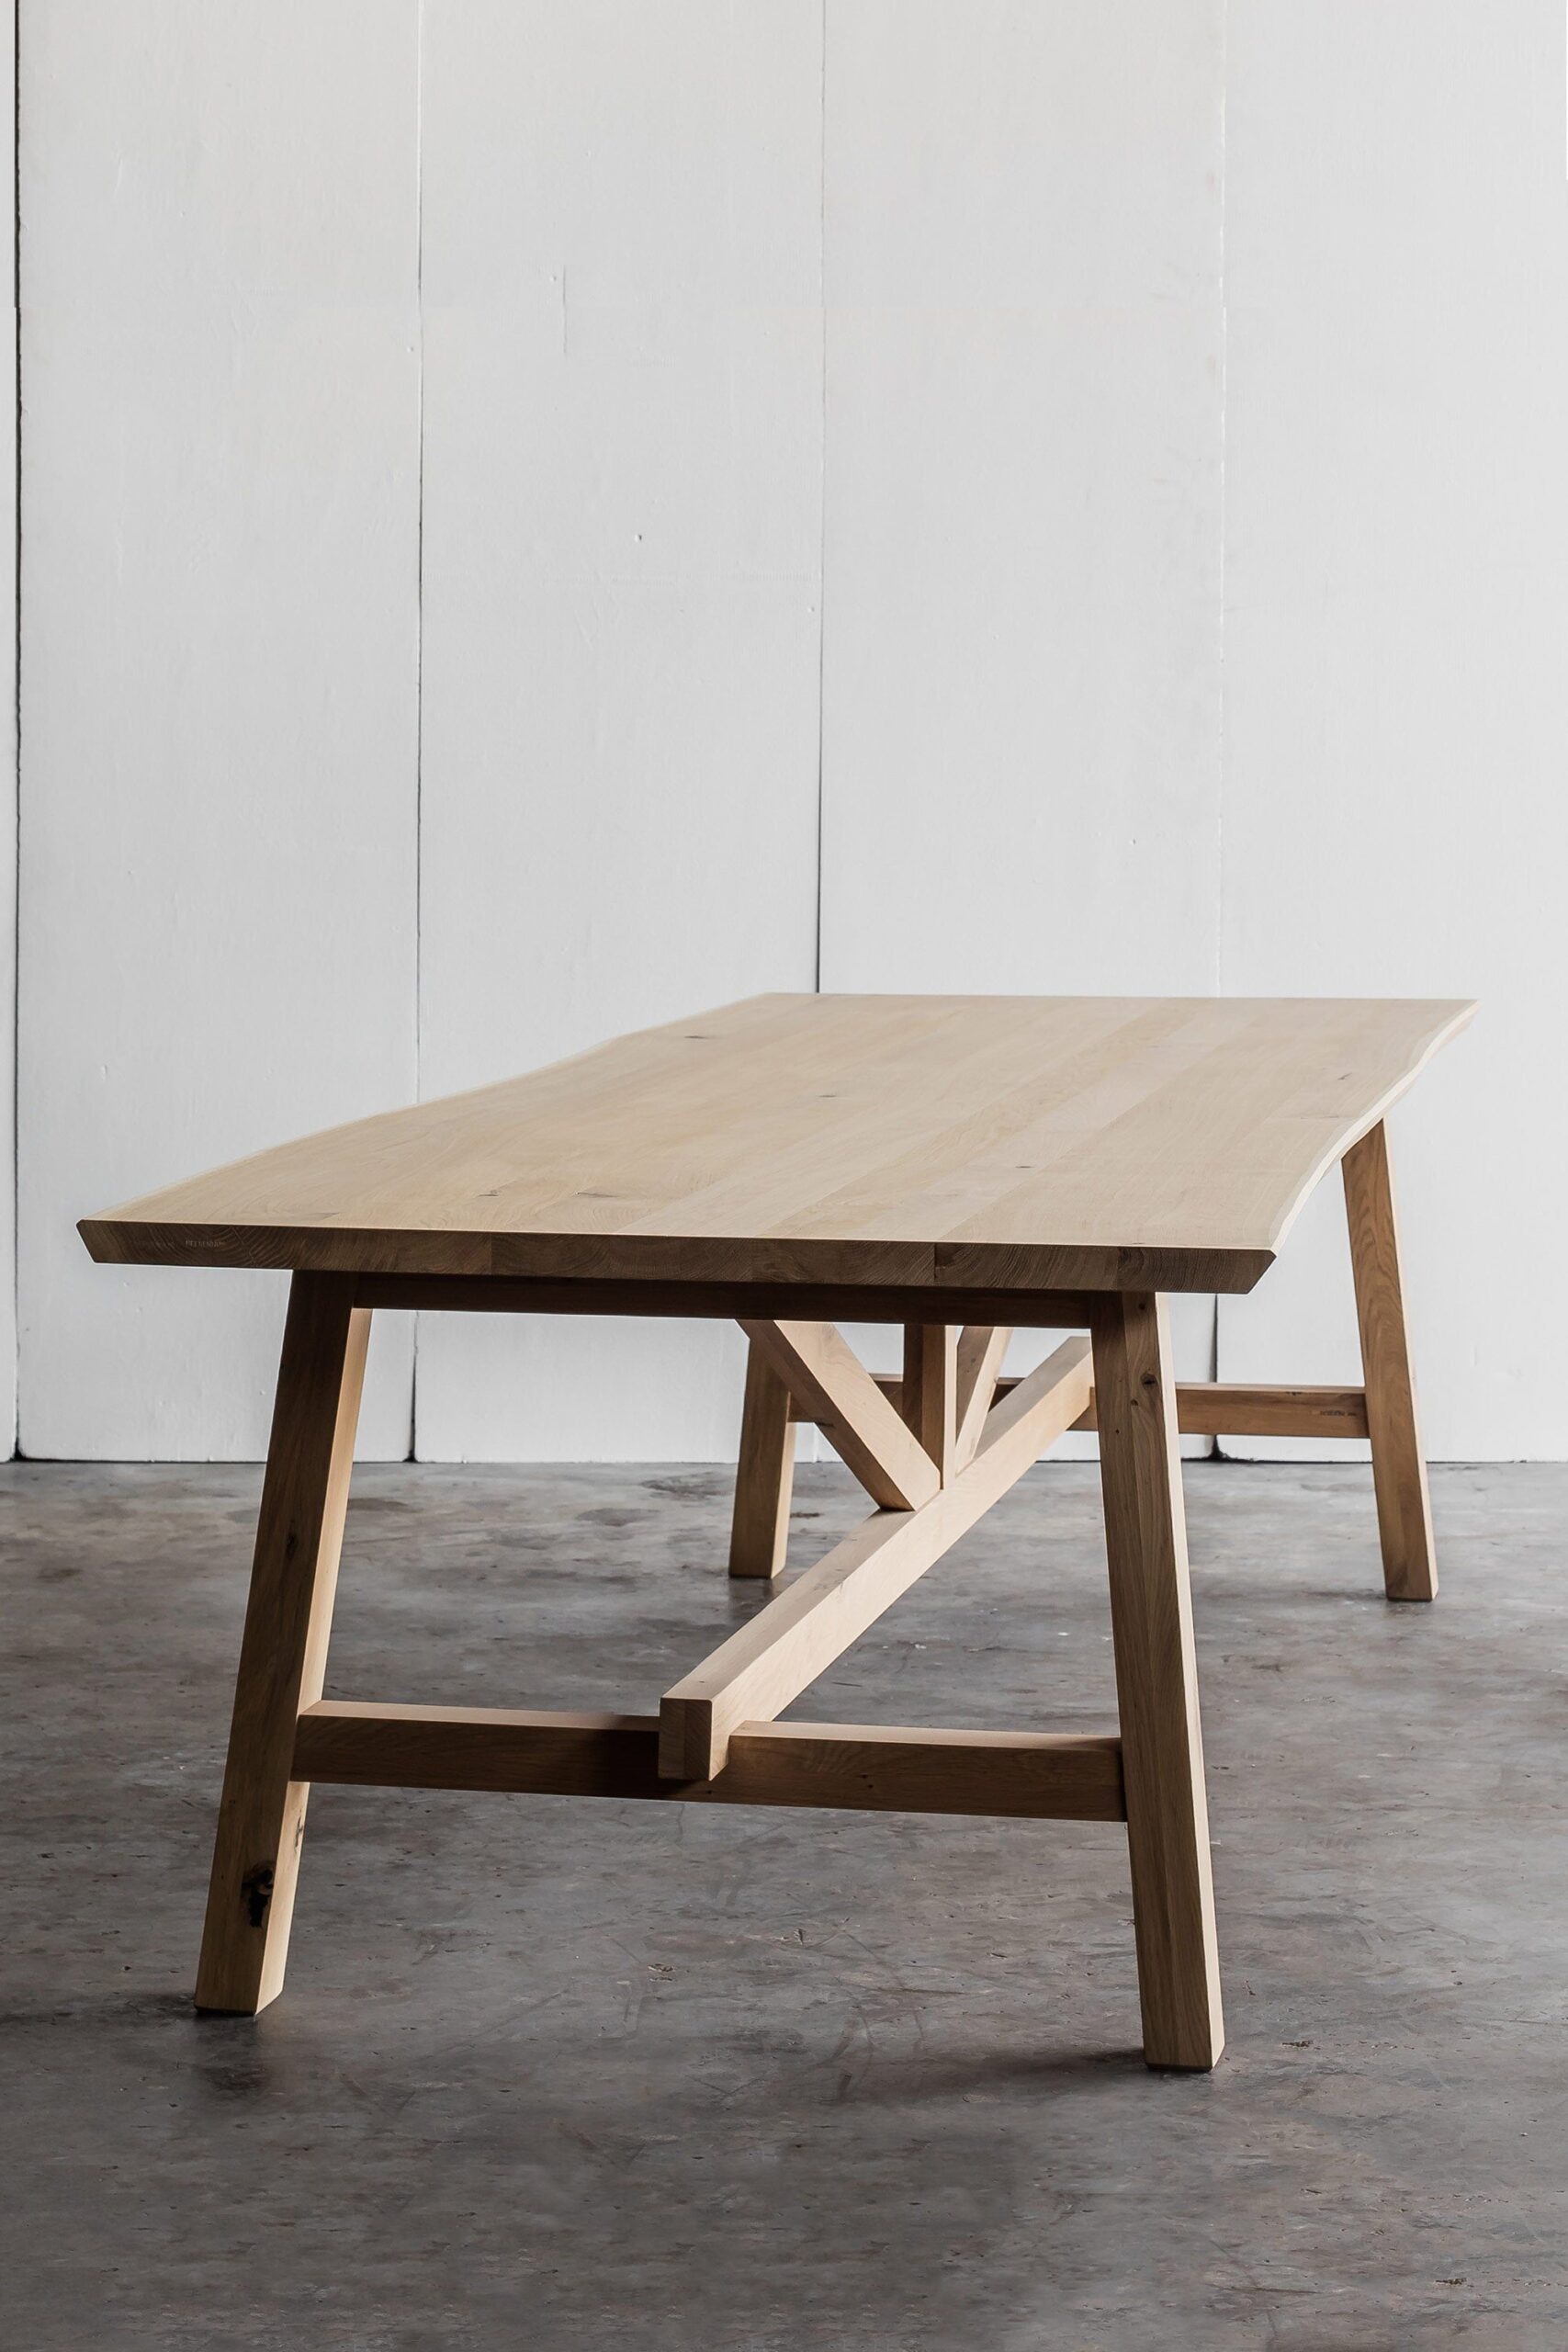 Prodigious oak dining tables for
  your  home